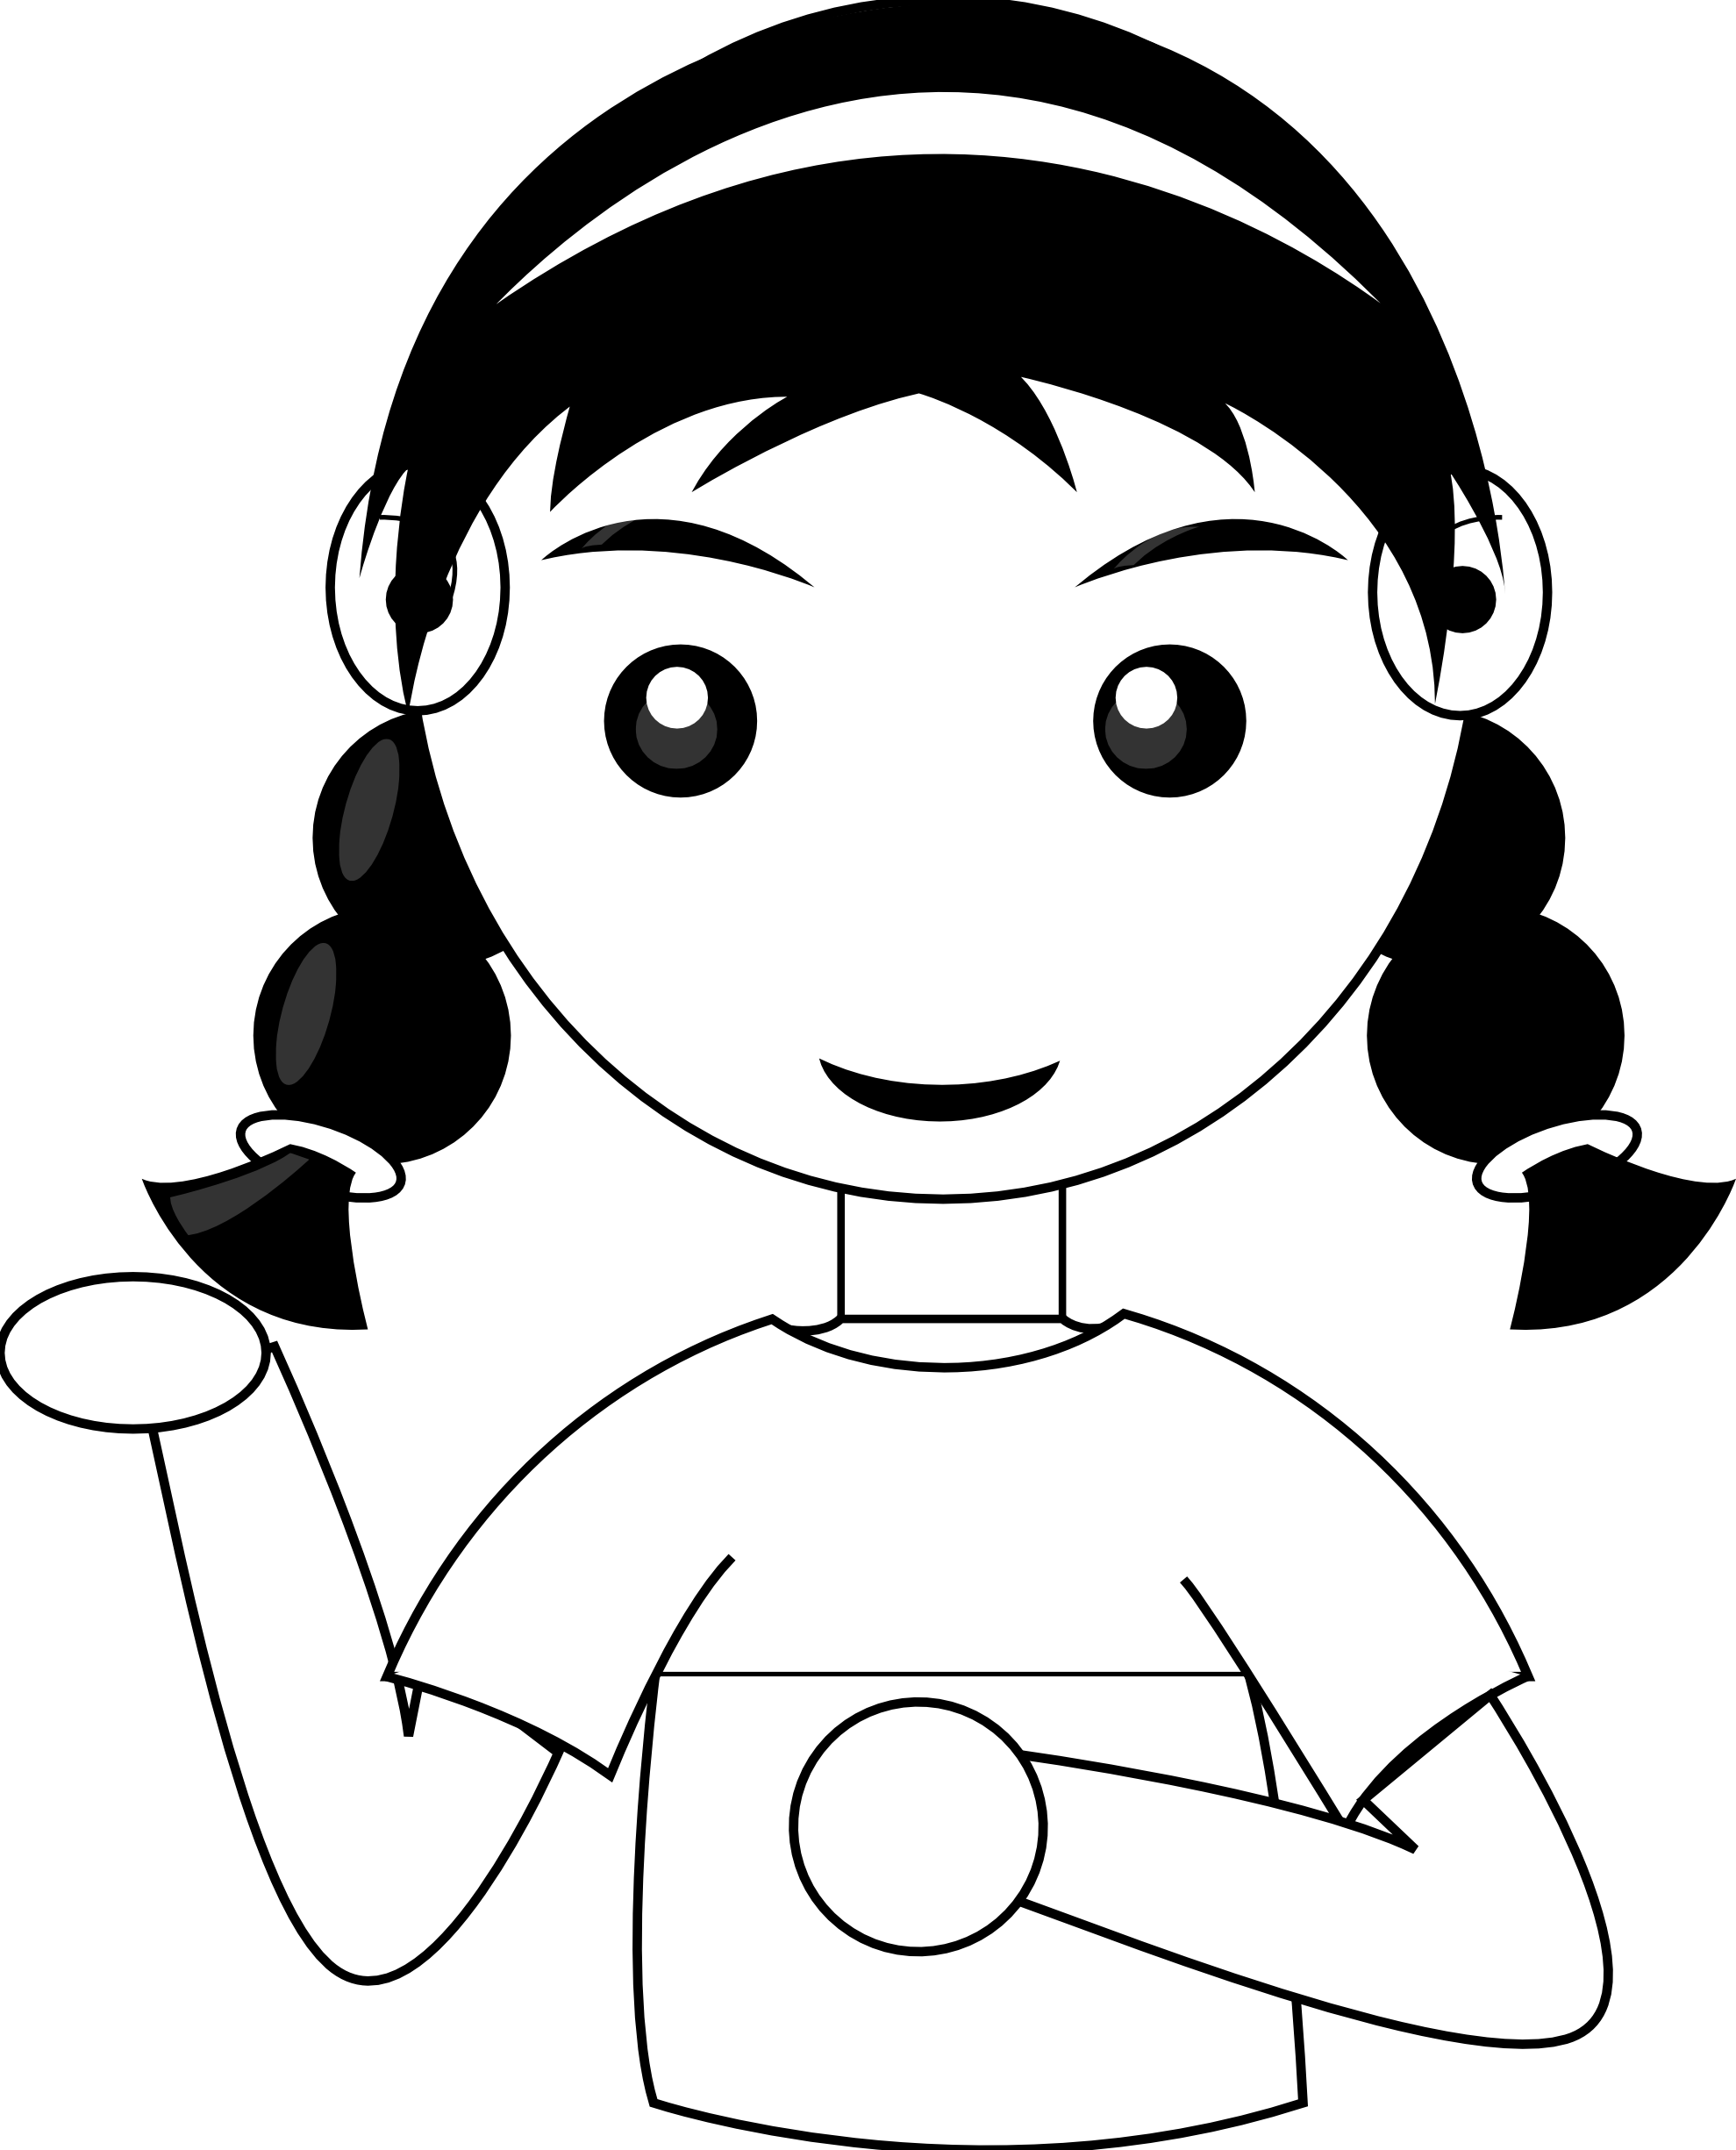 Cute black and white anime clipart